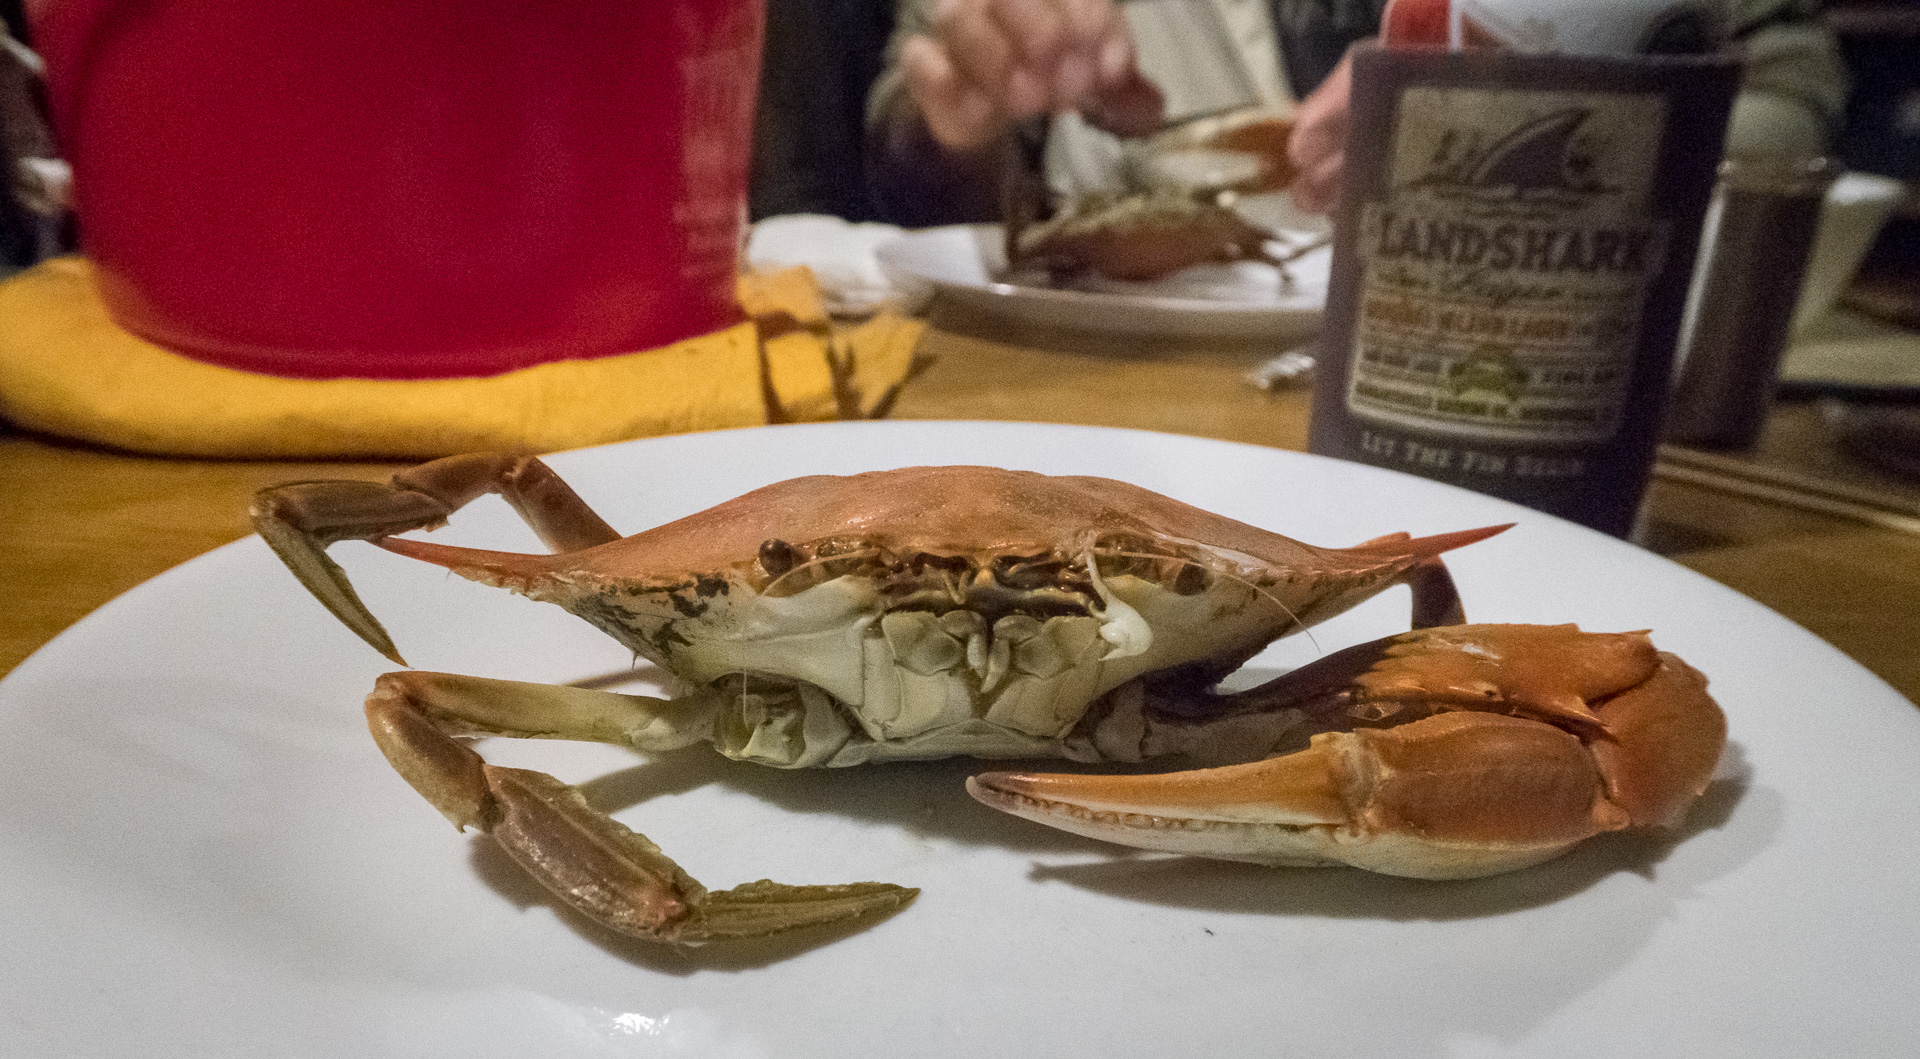 Sailboats, Midshipmen and Blue Crabs, Oh My!